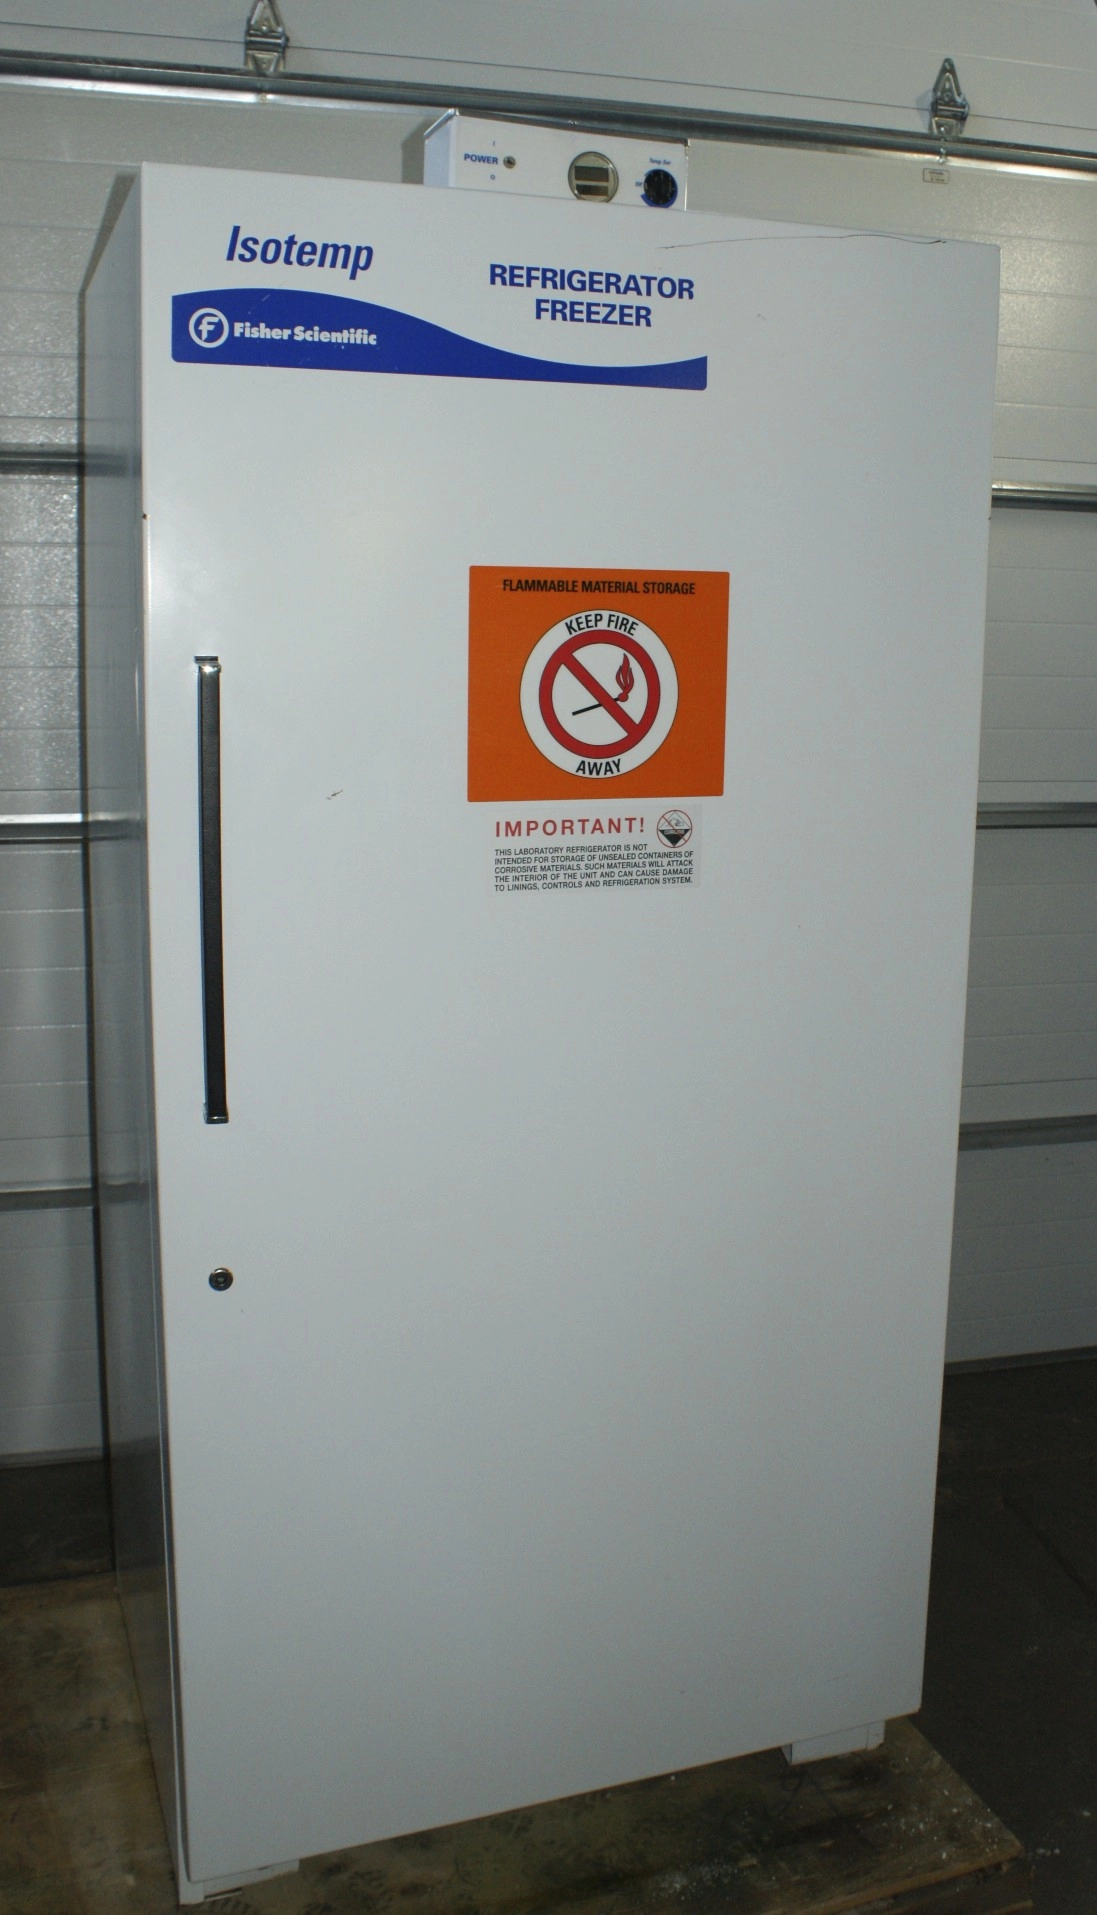 Isotemp Flammable Material Storage Refrigerator/Freezer used nice Fisher 13-986-425D 25 cu. ft. FMS Refrigerator Freezer not